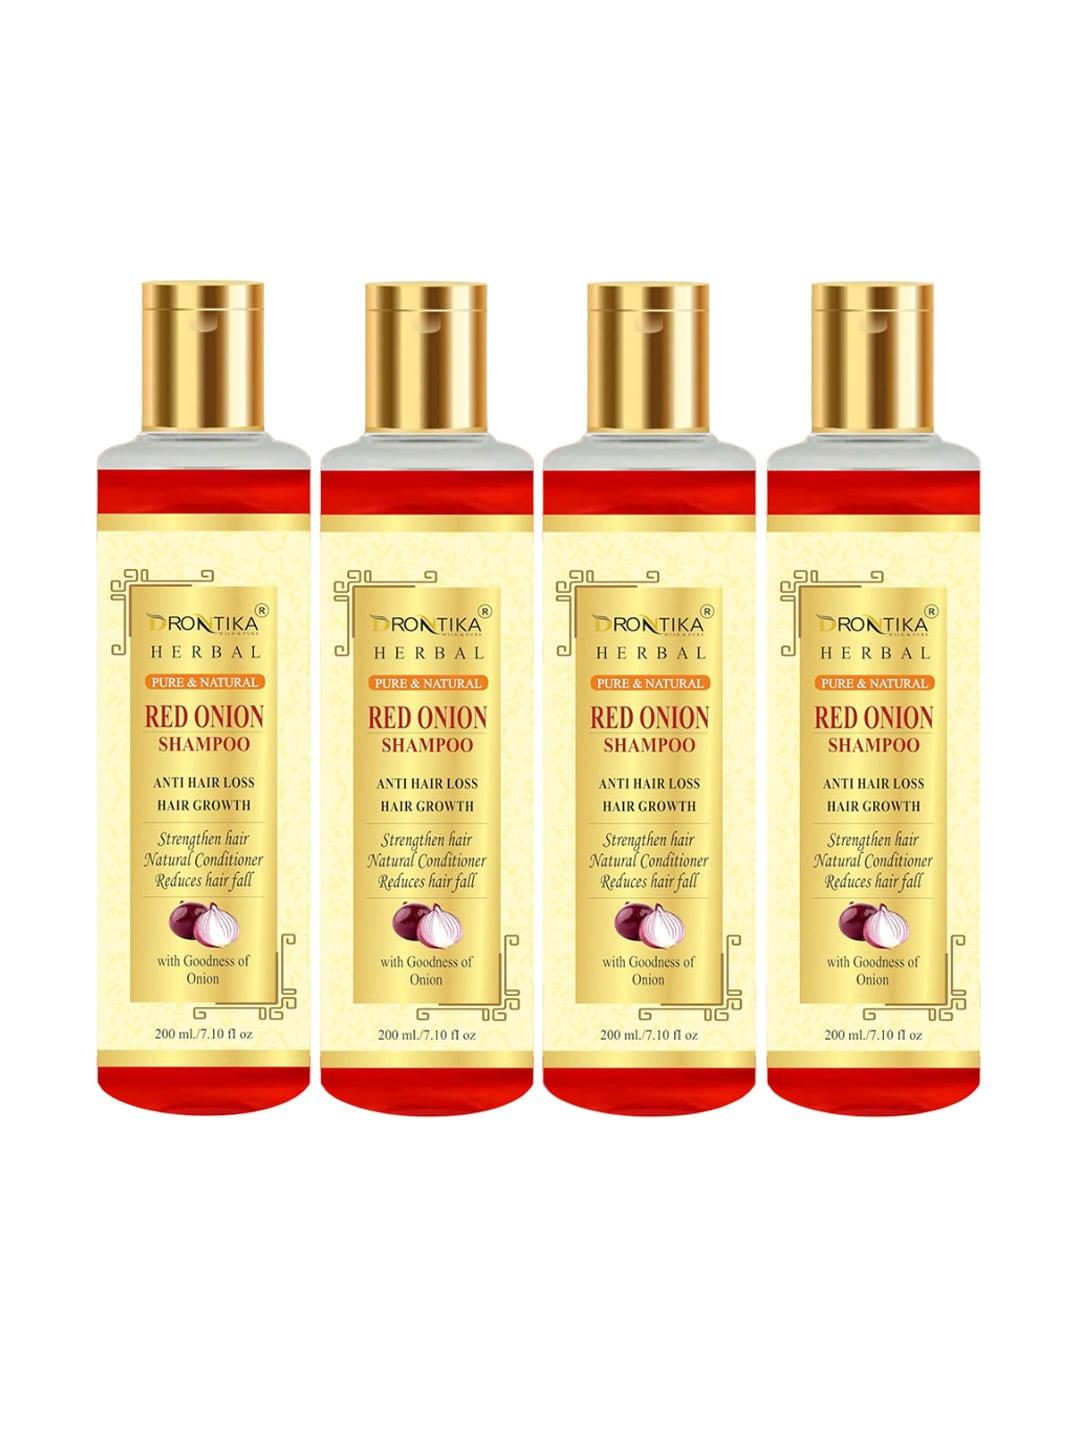 DRONTIKA Herbal Set of 4 Pure & Natural Red Onion Shampoo for Hair Growth - 200ml Each